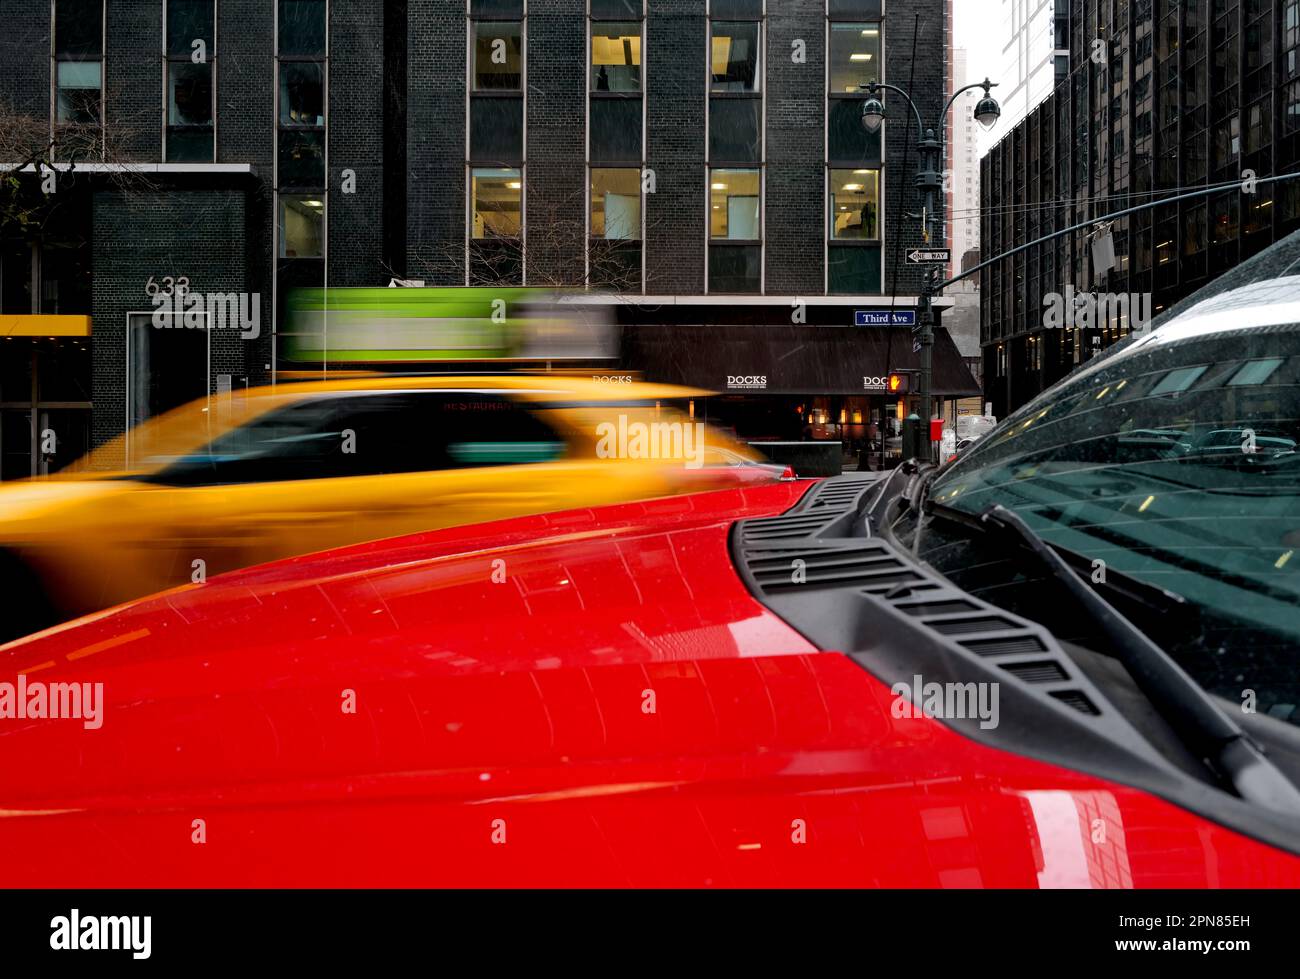 Red pickup truck hood and moving yellow cab on a New York City street Stock Photo